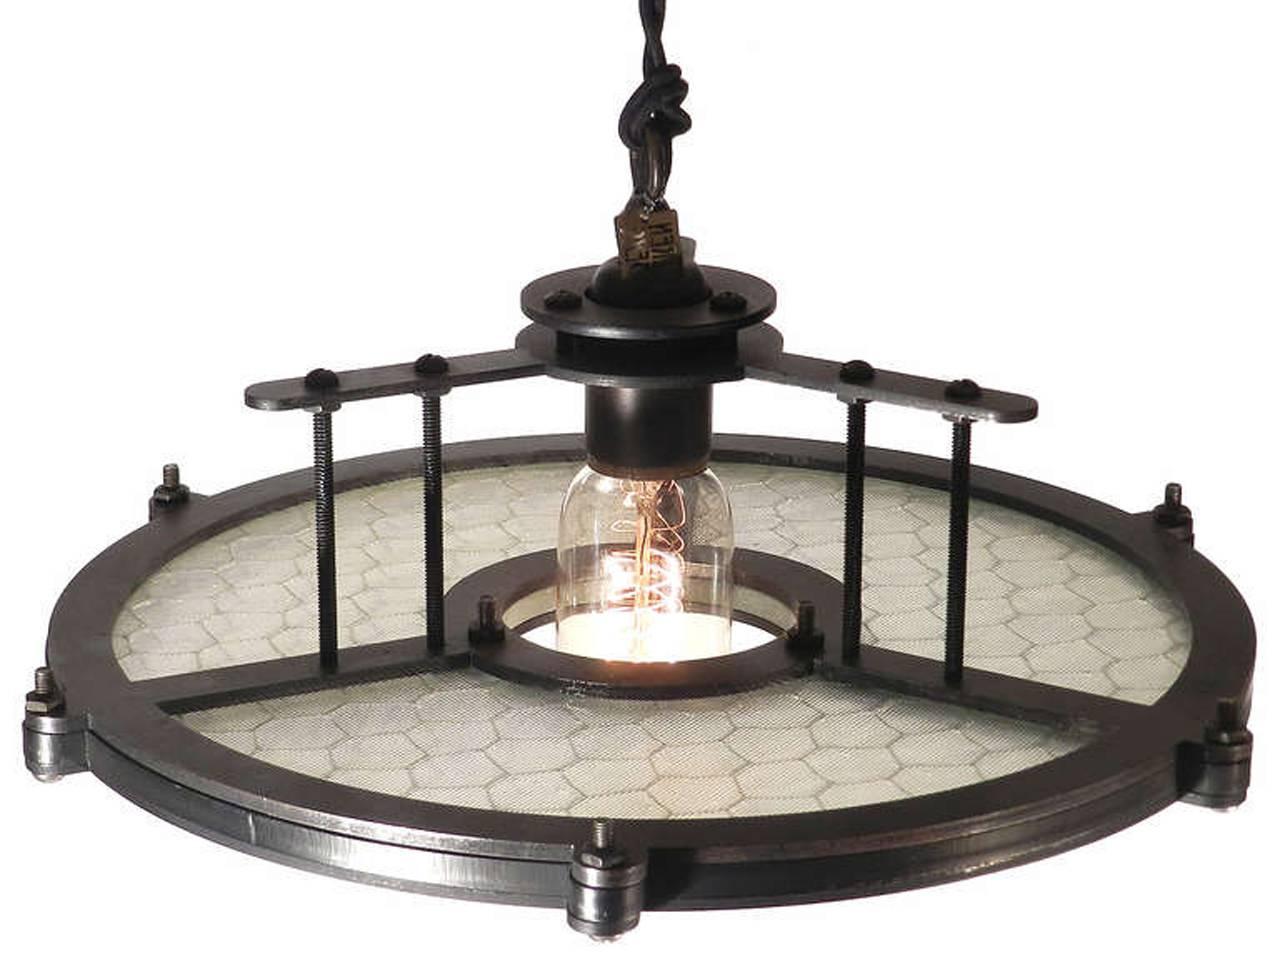 These unique 13 inch diameter pendants feature 80 year old reeded Industrial wire glass. We designed the simple iron frame to highlight the beauty of this antique utilitarian factory glass. The iron frame has an aged black finish. The socket is